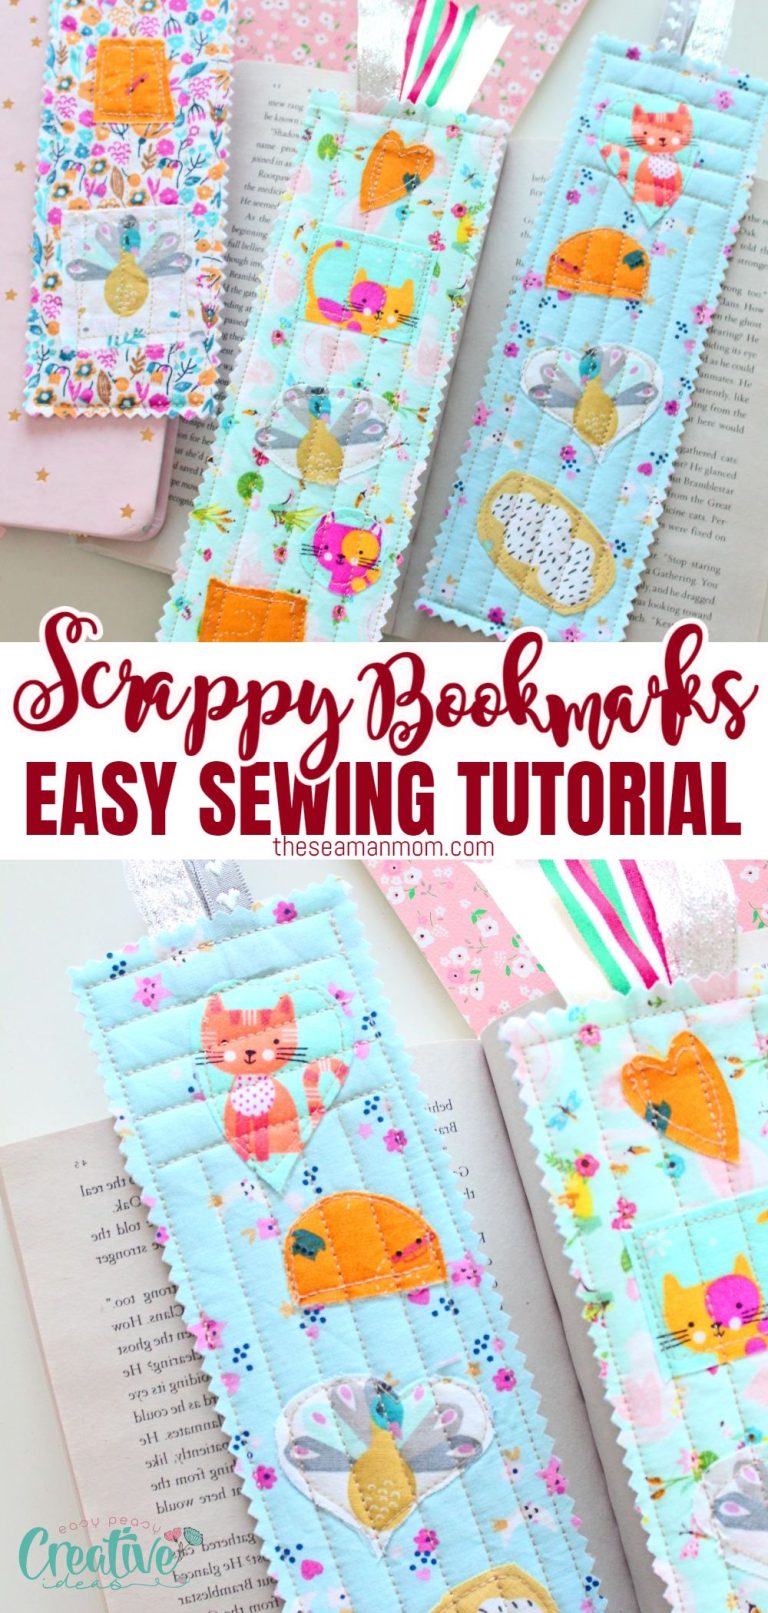 Easy bookmarks to sew with fabric scraps - Easy Peasy Creative Ideas